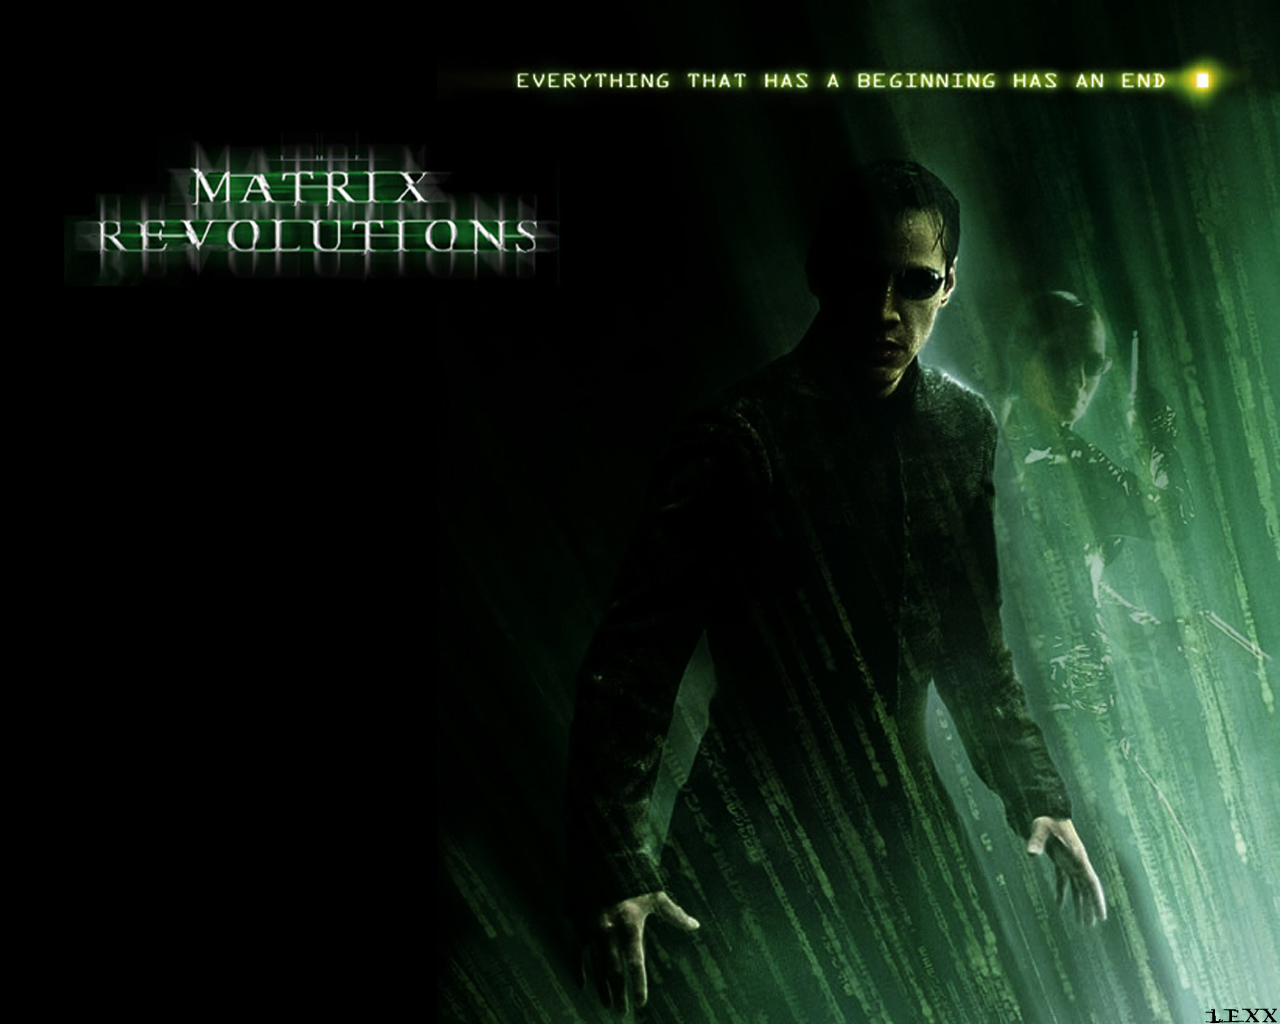 The Matrix Revolutions Is A American Science Fiction Film And